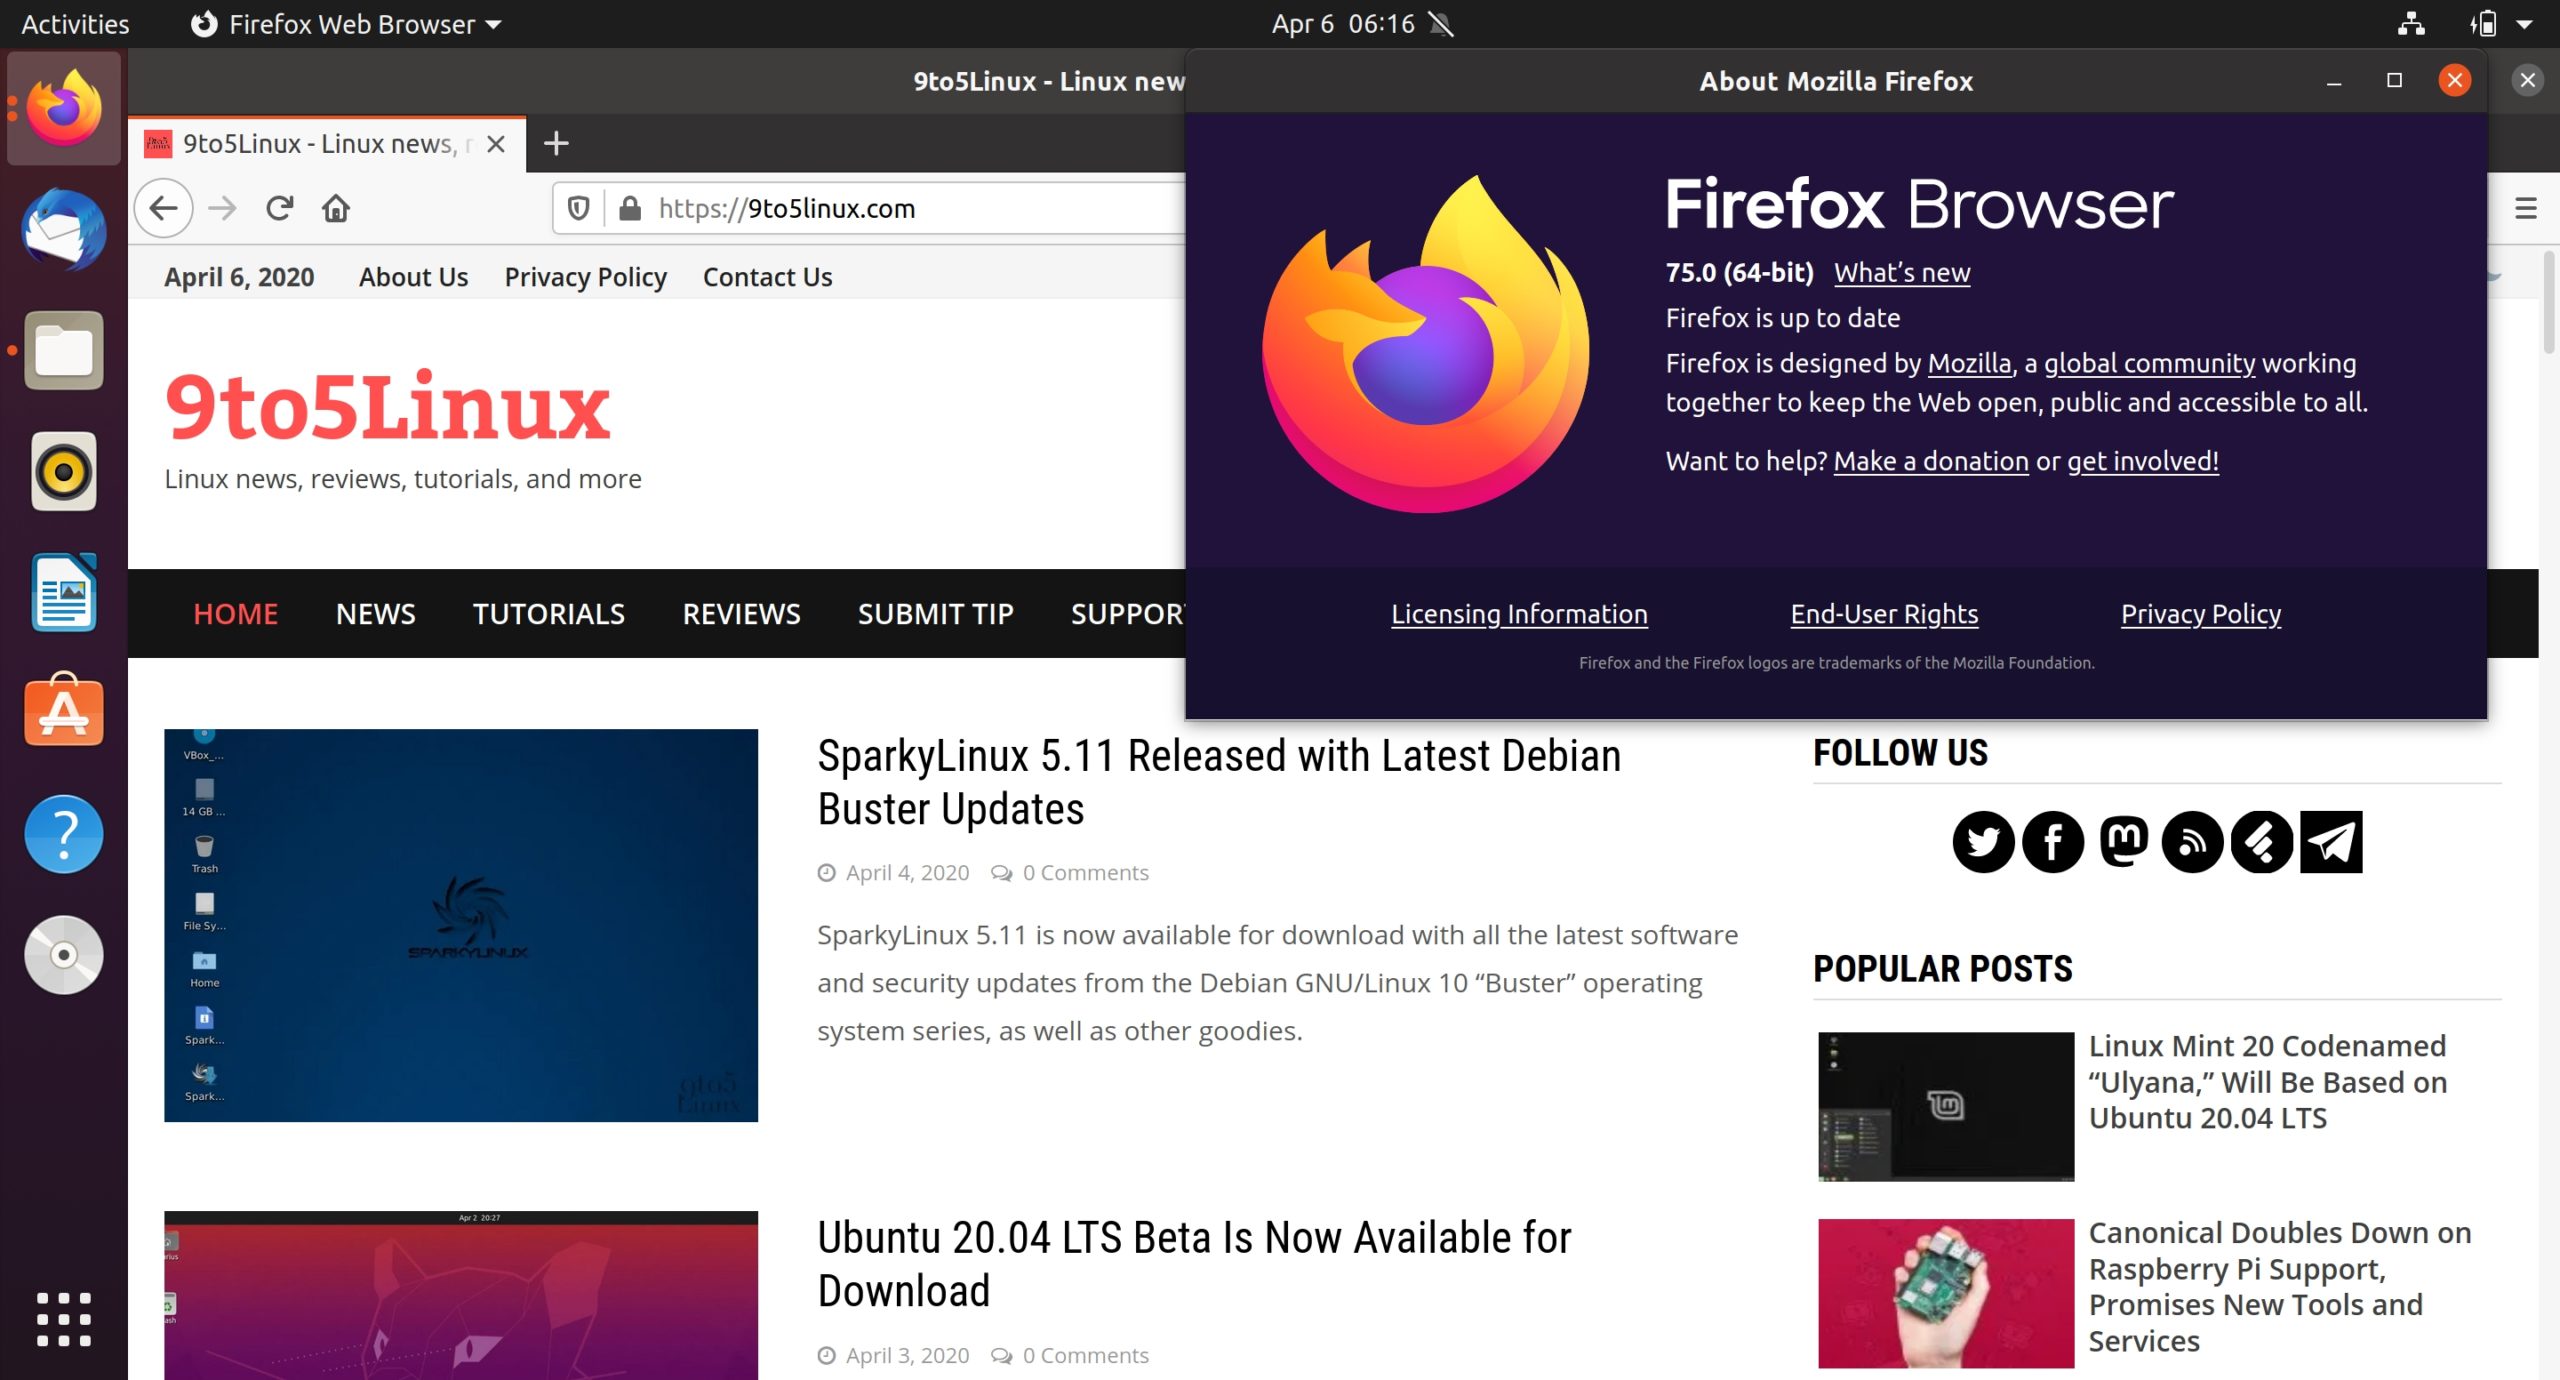 Mozilla Firefox 75 Is Now Available for Download, Here’s What’s New